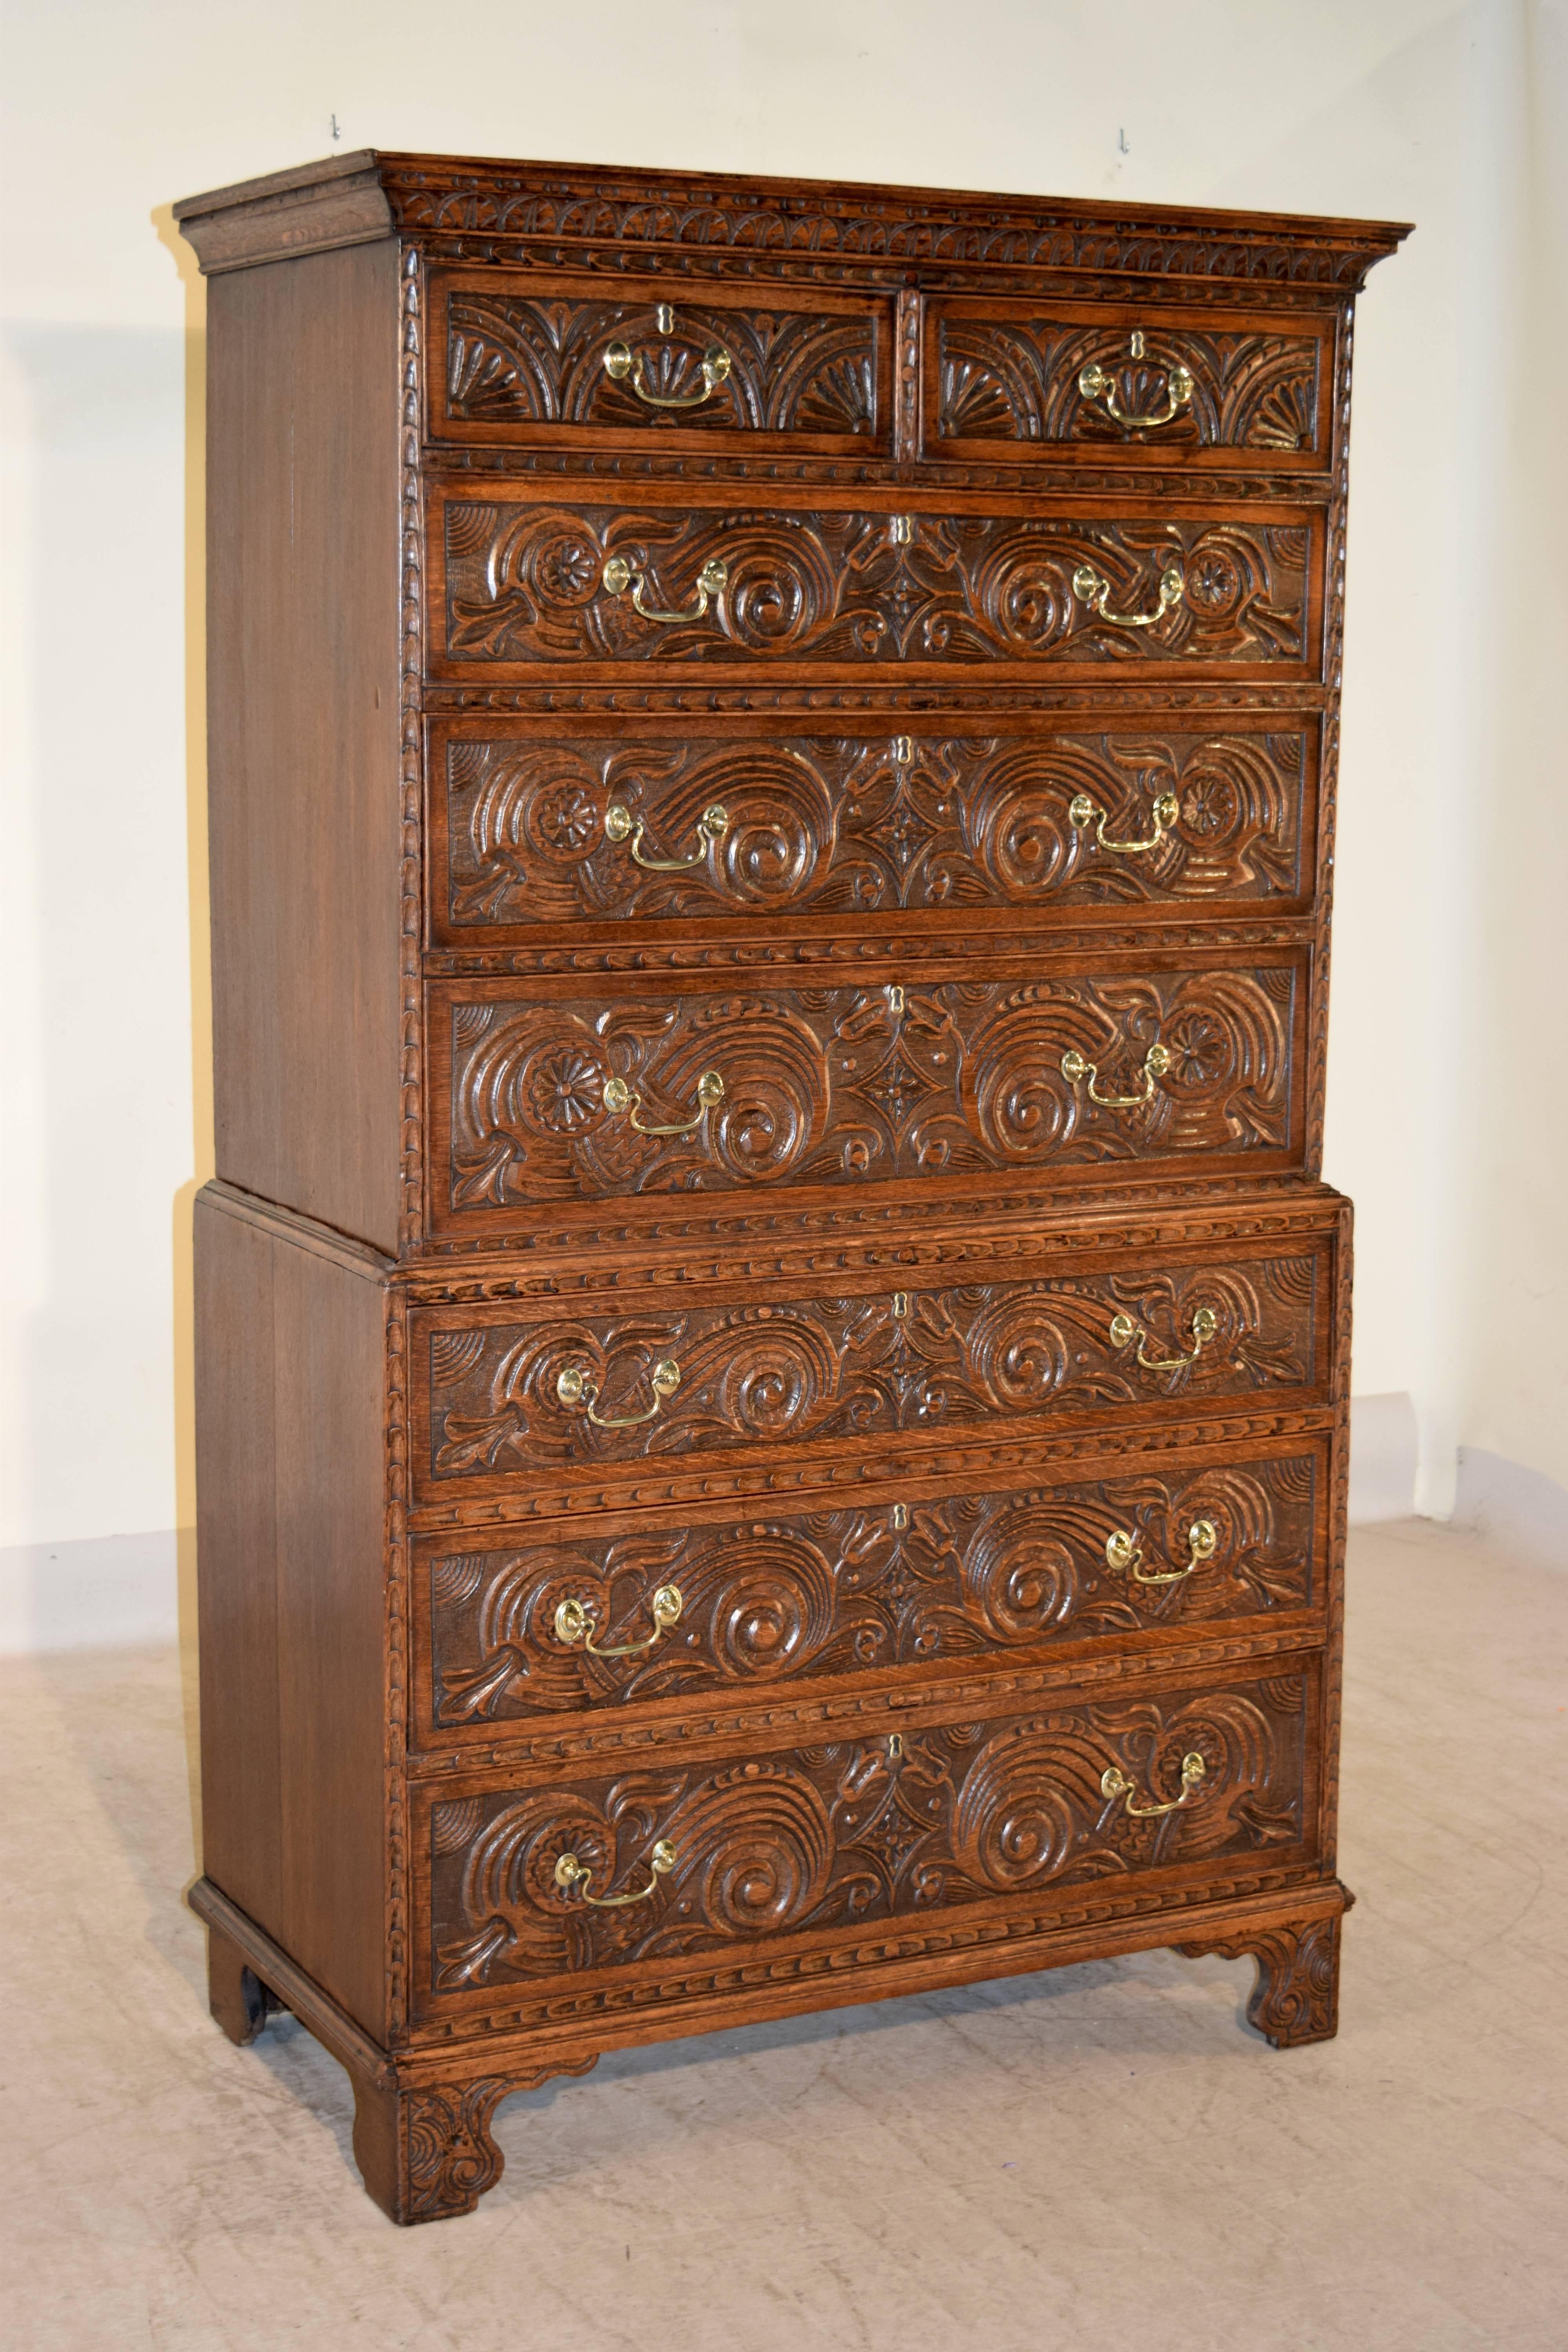 18th century English oak chest on chest with carved decorated crown molding around the top, following down to a two-piece case which has two drawers over six drawers. The sides of the chest are simple and the chest is supported on carved decorated